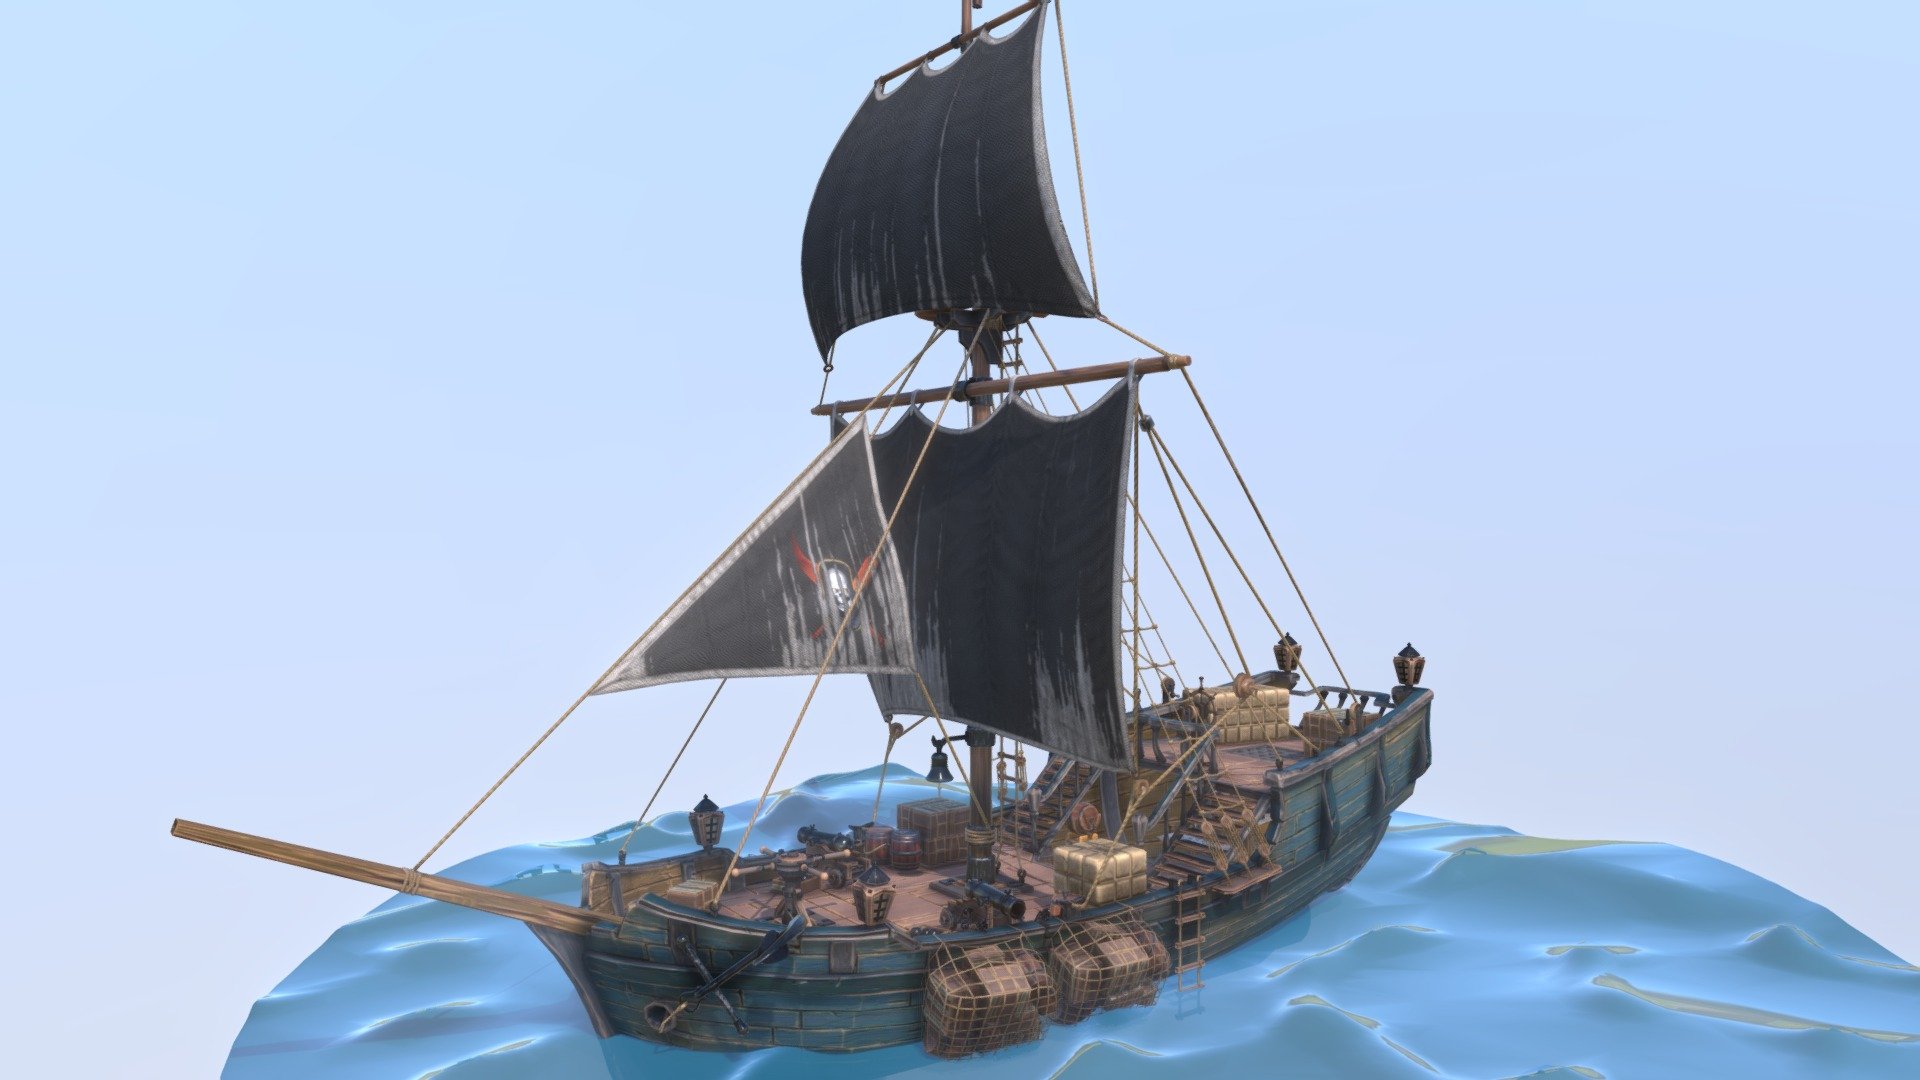 This is one of the ships you can navigate in Shorecut, a game that is being made an that will run on Oculus GO and other mobile VR headsets.

Please consider following the game on: 
Facebook: https://www.facebook.com/shorecutvr
Twitter: https://twitter.com/ShorecutVR
Instagram: https://www.instagram.com/shorecutvr
Official website:  https://www.shorecutvr.com - Shorecut - Gunboat - 3D model by madseb 3d model